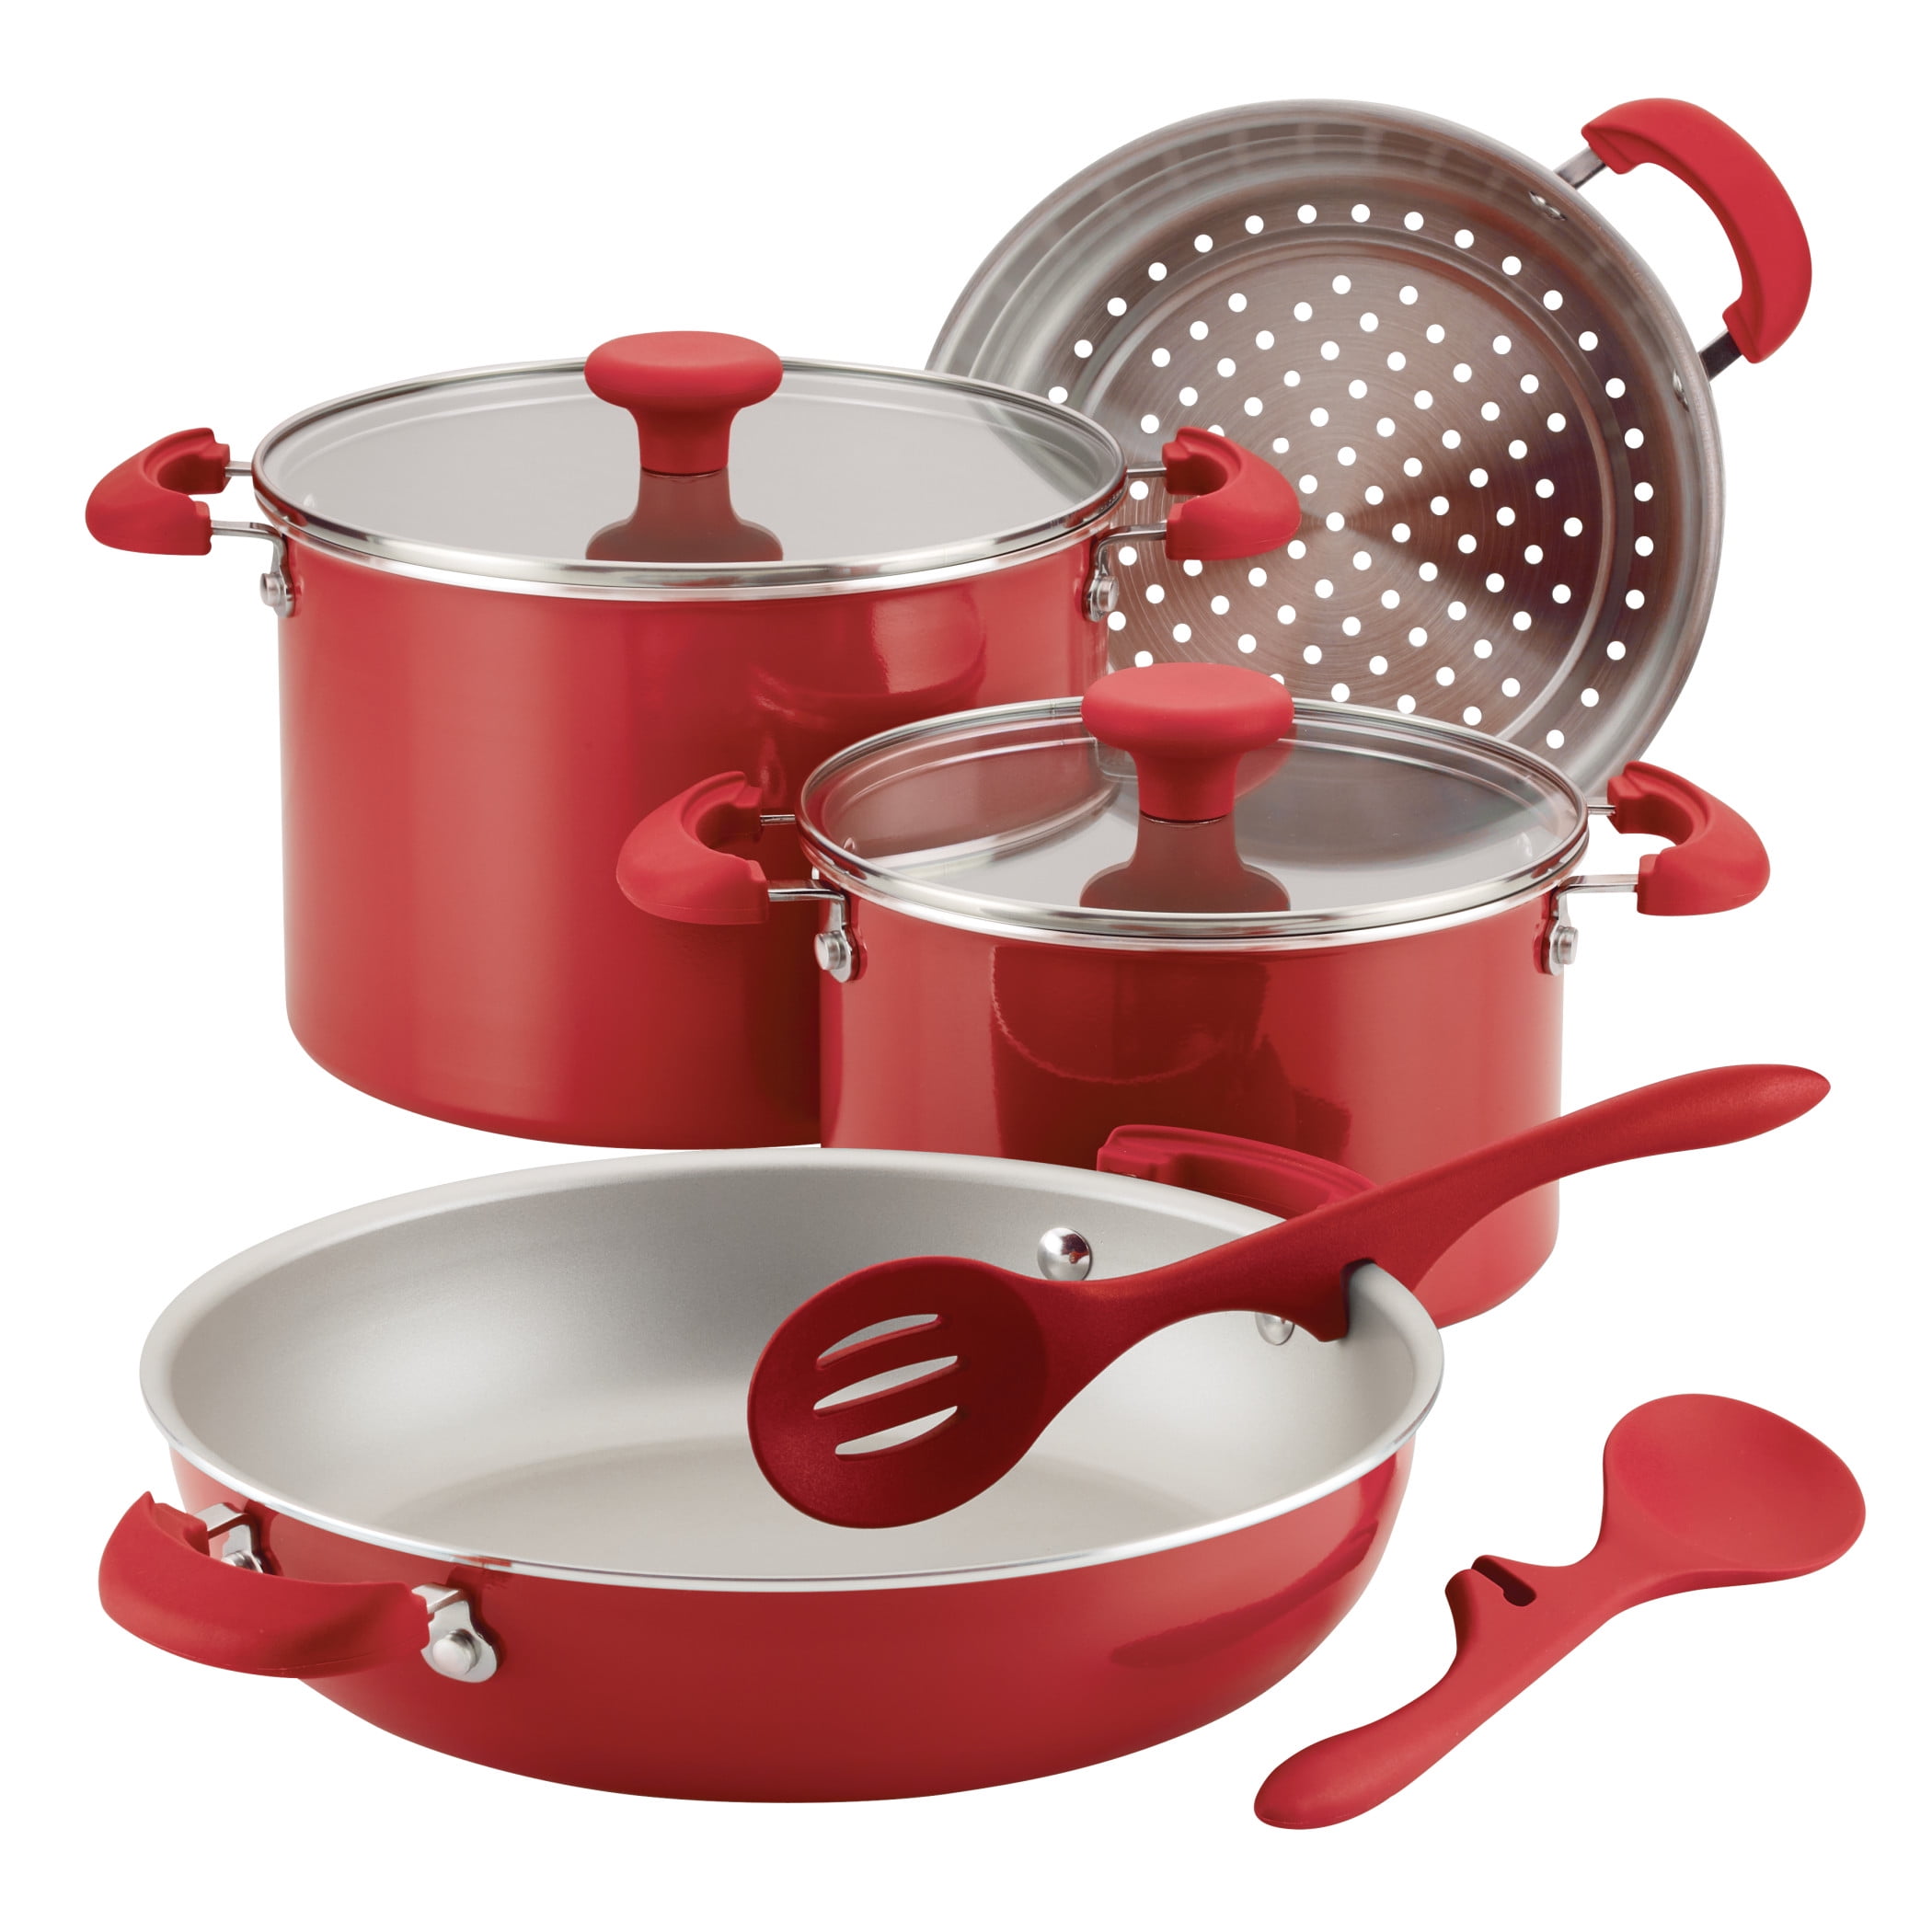 Redchef 5-Piece Ceramic Cookware Set - Non-Stick Frying Pots and Pans -  Stackable RV Cookware Sets for Camping - Kitchen - AliExpress